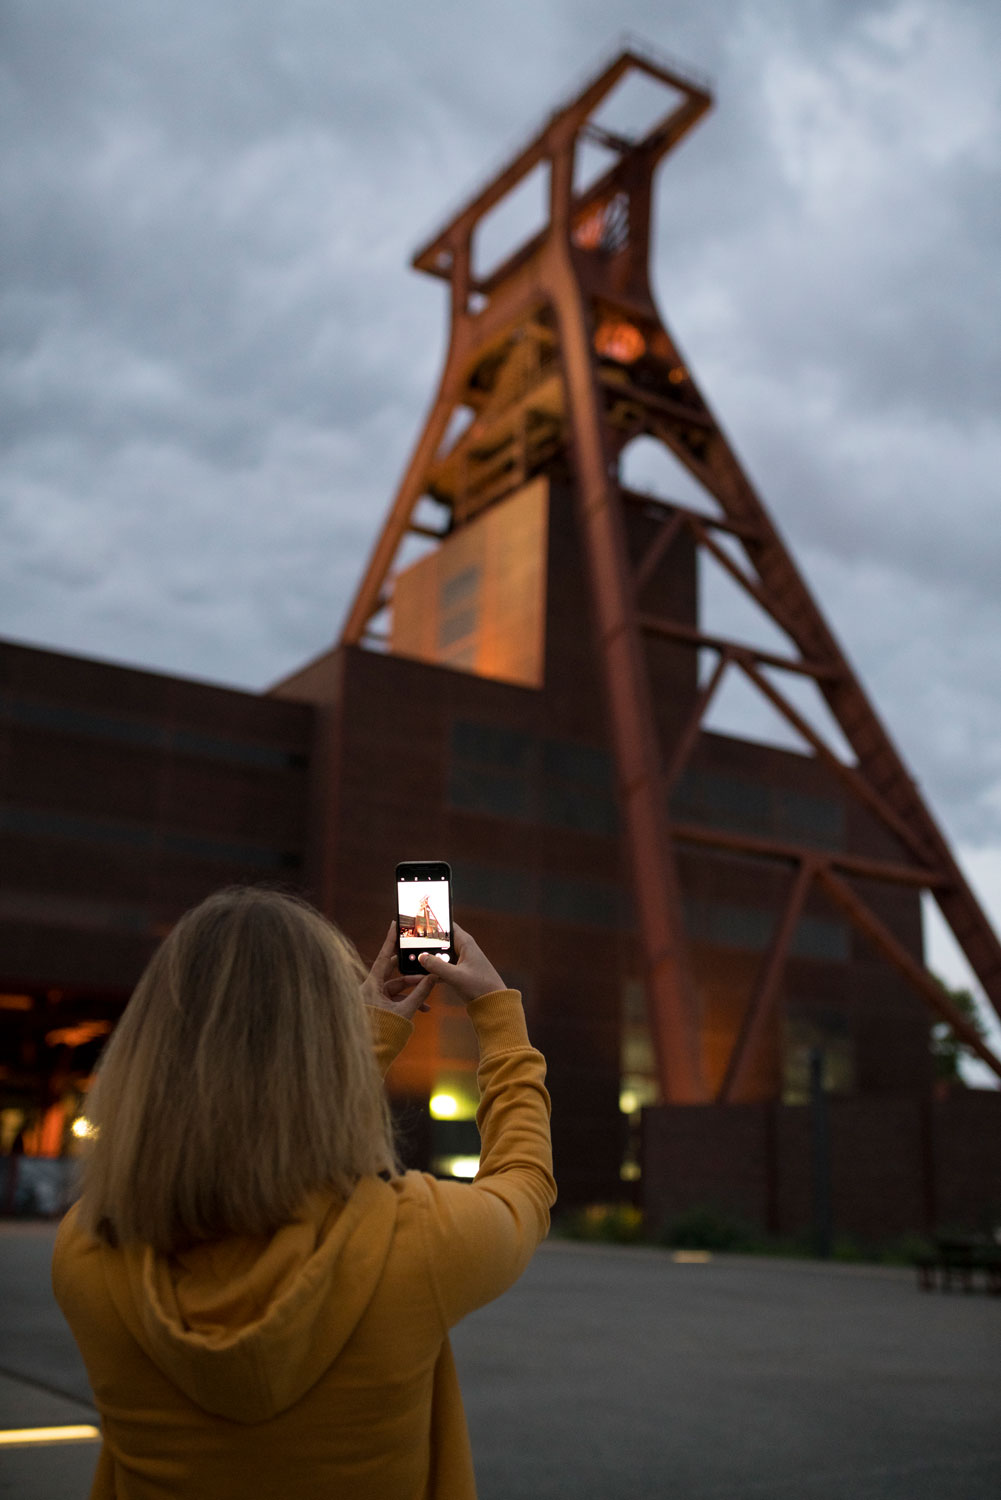 A woman with a smartphone photographs the winding tower of the German Mining Museum in Bochum at sunset.